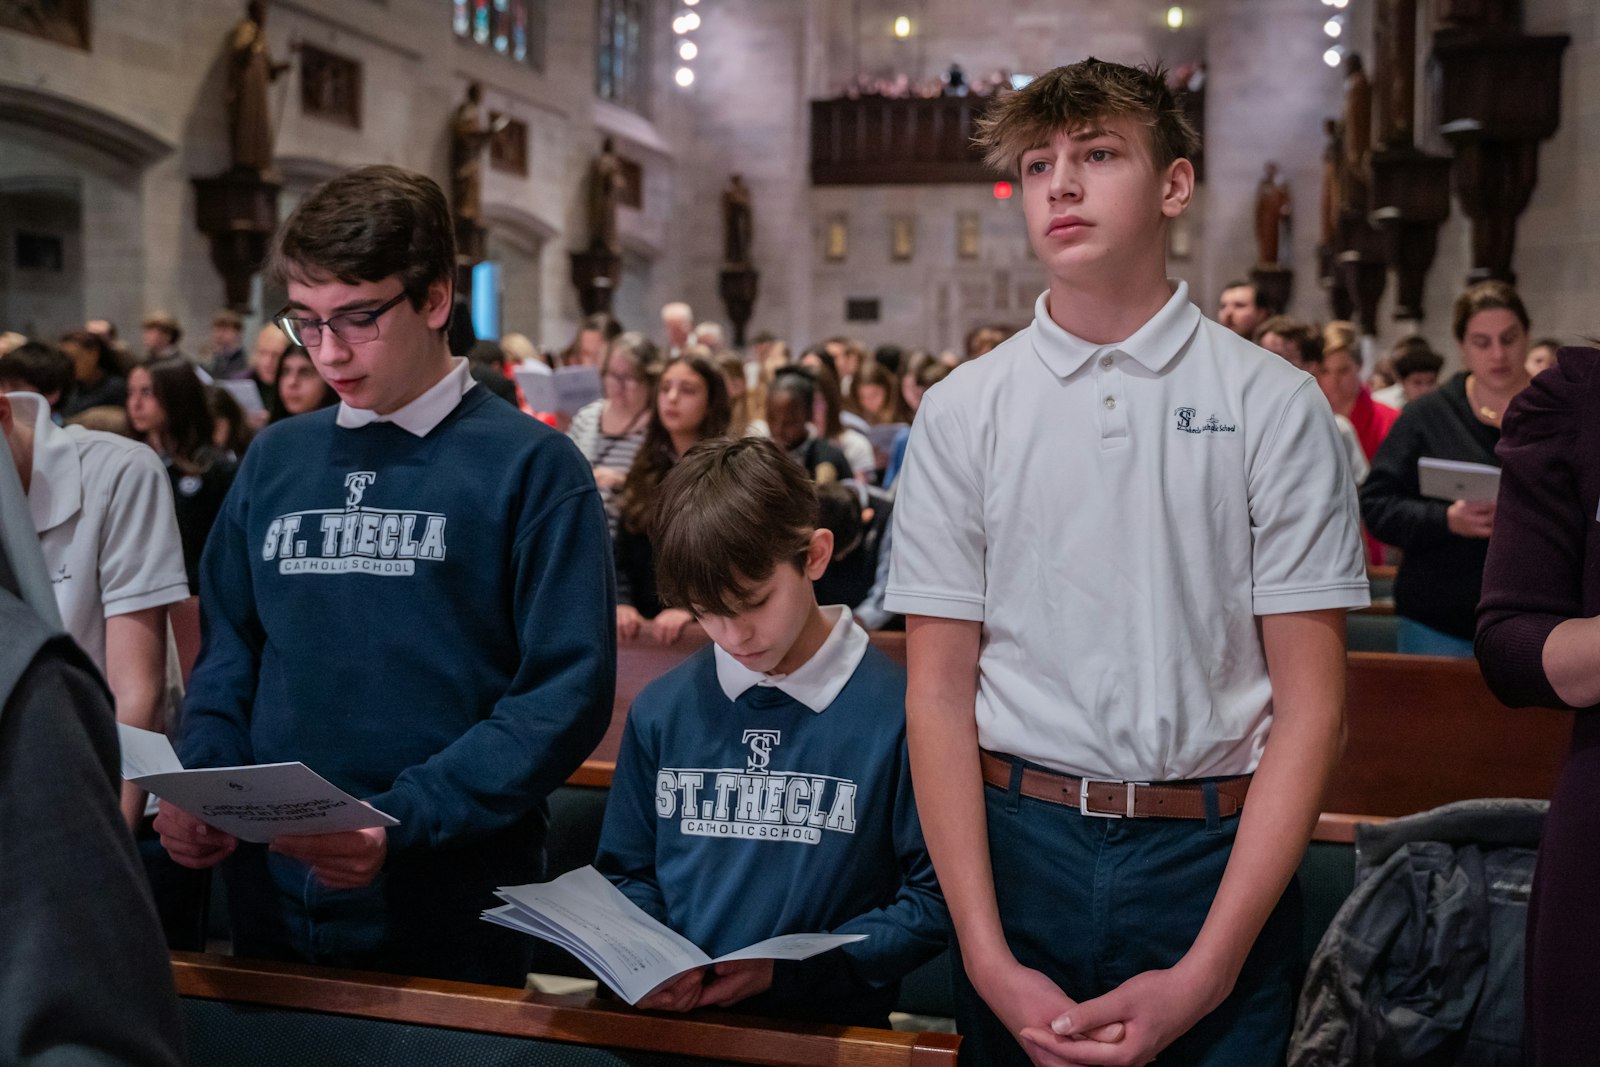 Students from St. Thecla Catholic School in Clinton Township take part in the annual Catholic Schools Week Mass. The week celebrates academics, faith and service in a Catholic educational setting and provides an opportunity for schools to showcase what they can offer to the community.